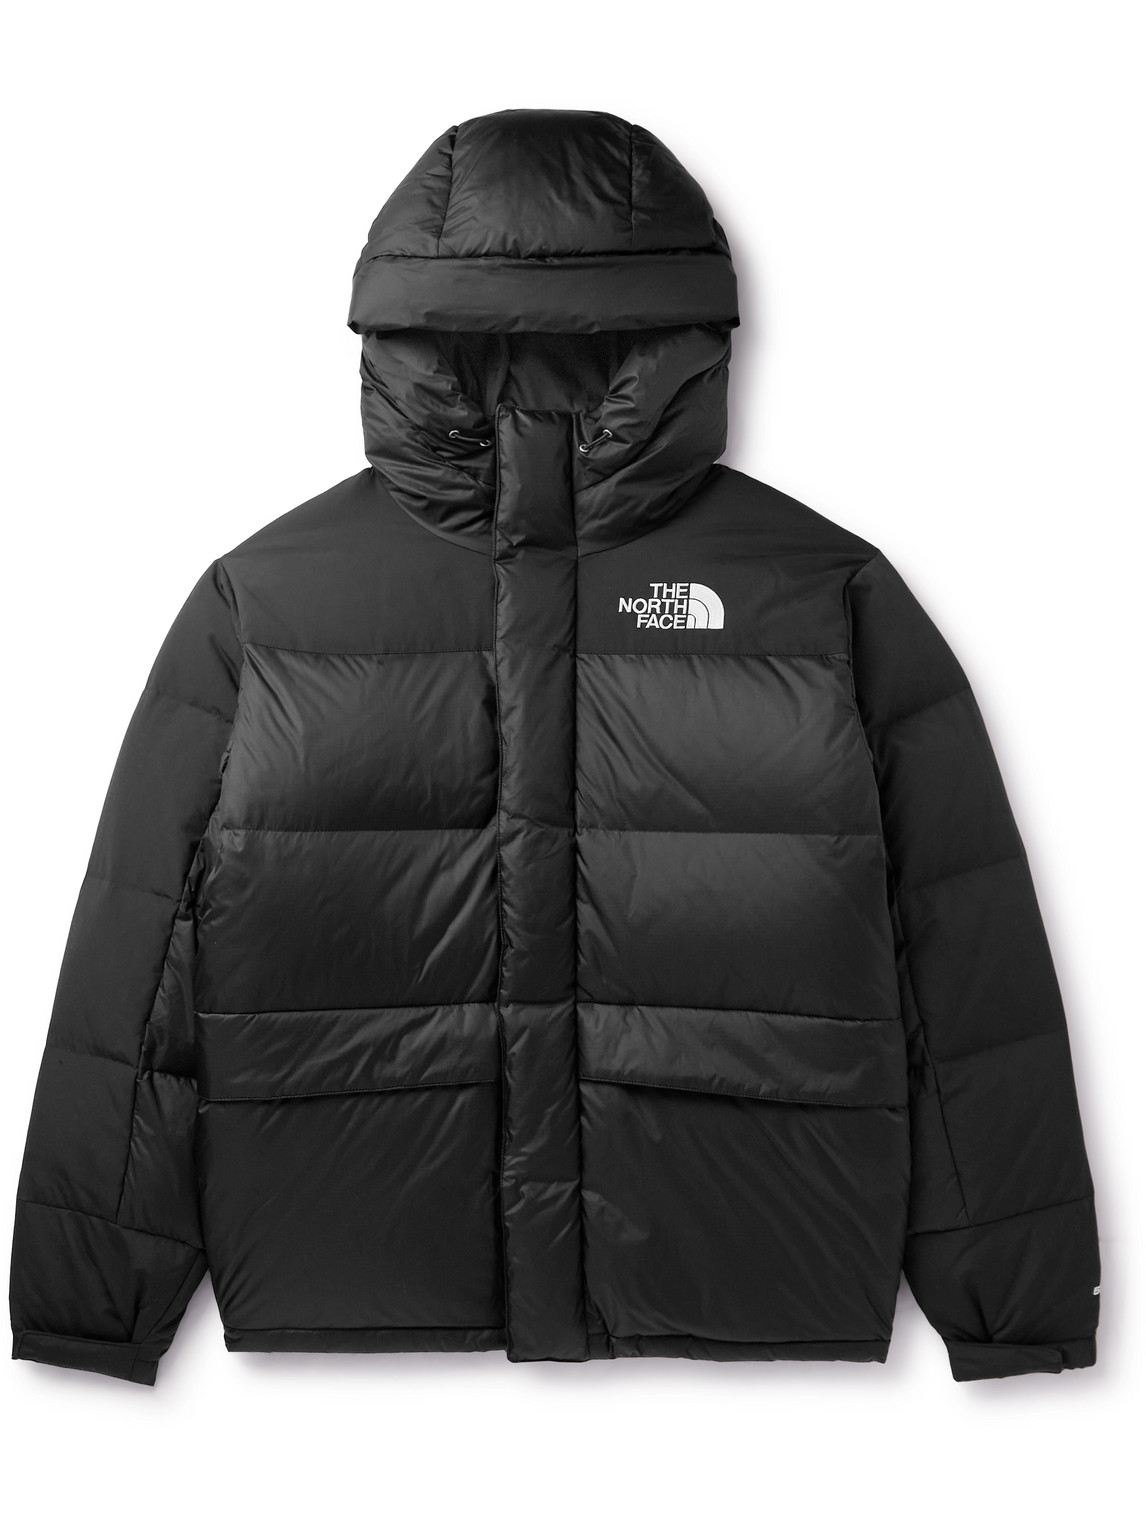 The North Face Grays Torreys Insulated Jacket In Black | ModeSens